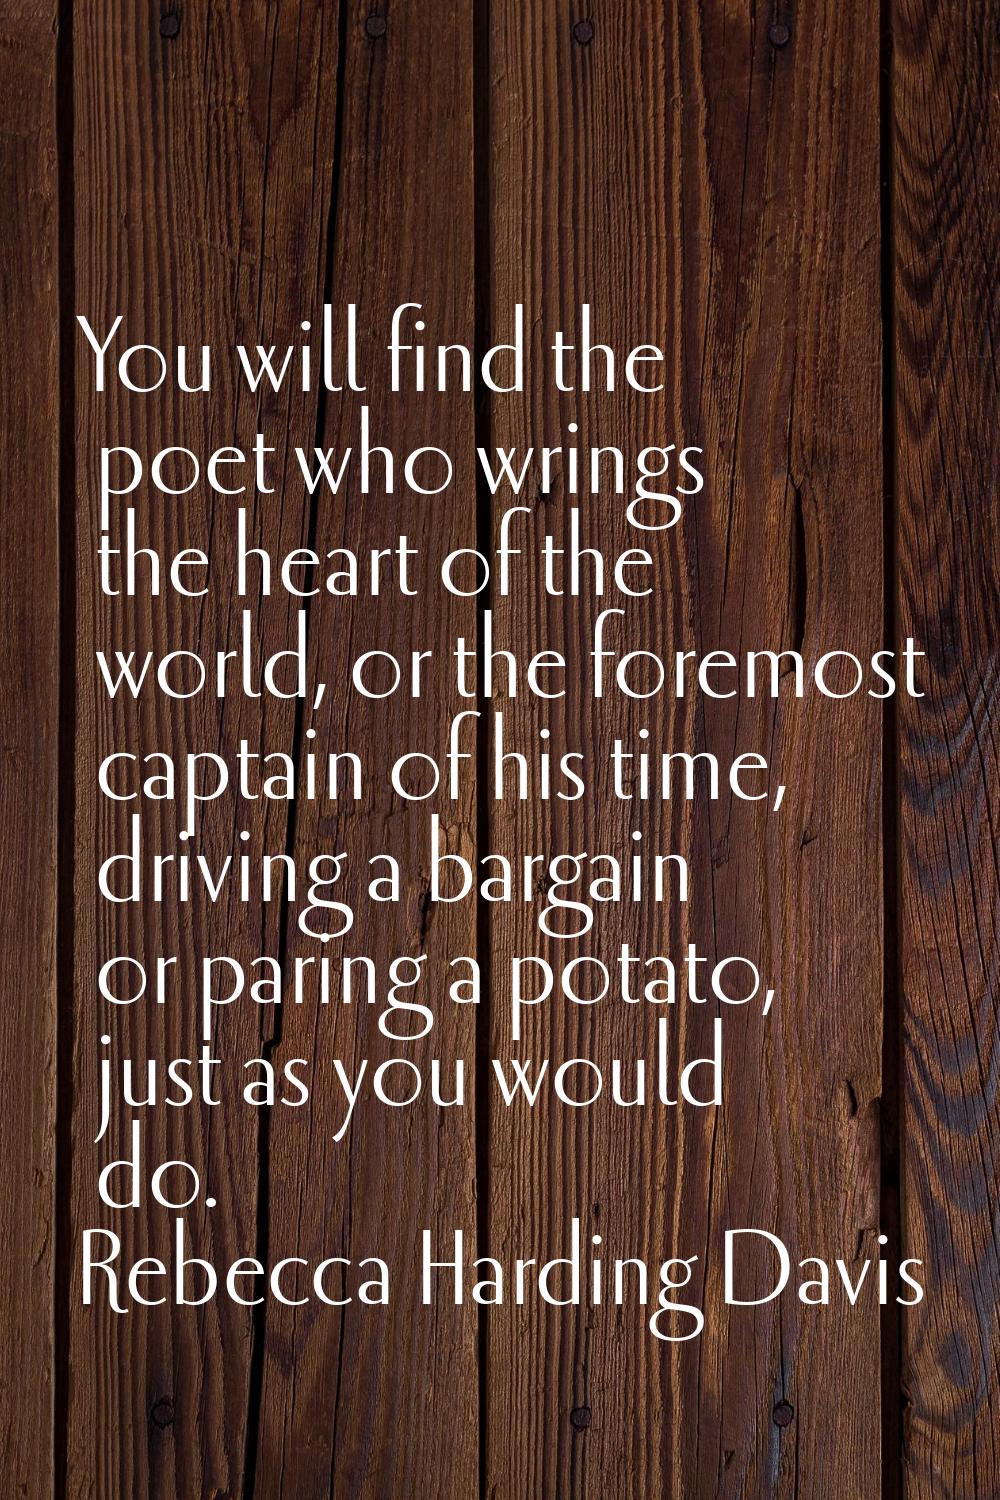 You will find the poet who wrings the heart of the world, or the foremost captain of his time, driv